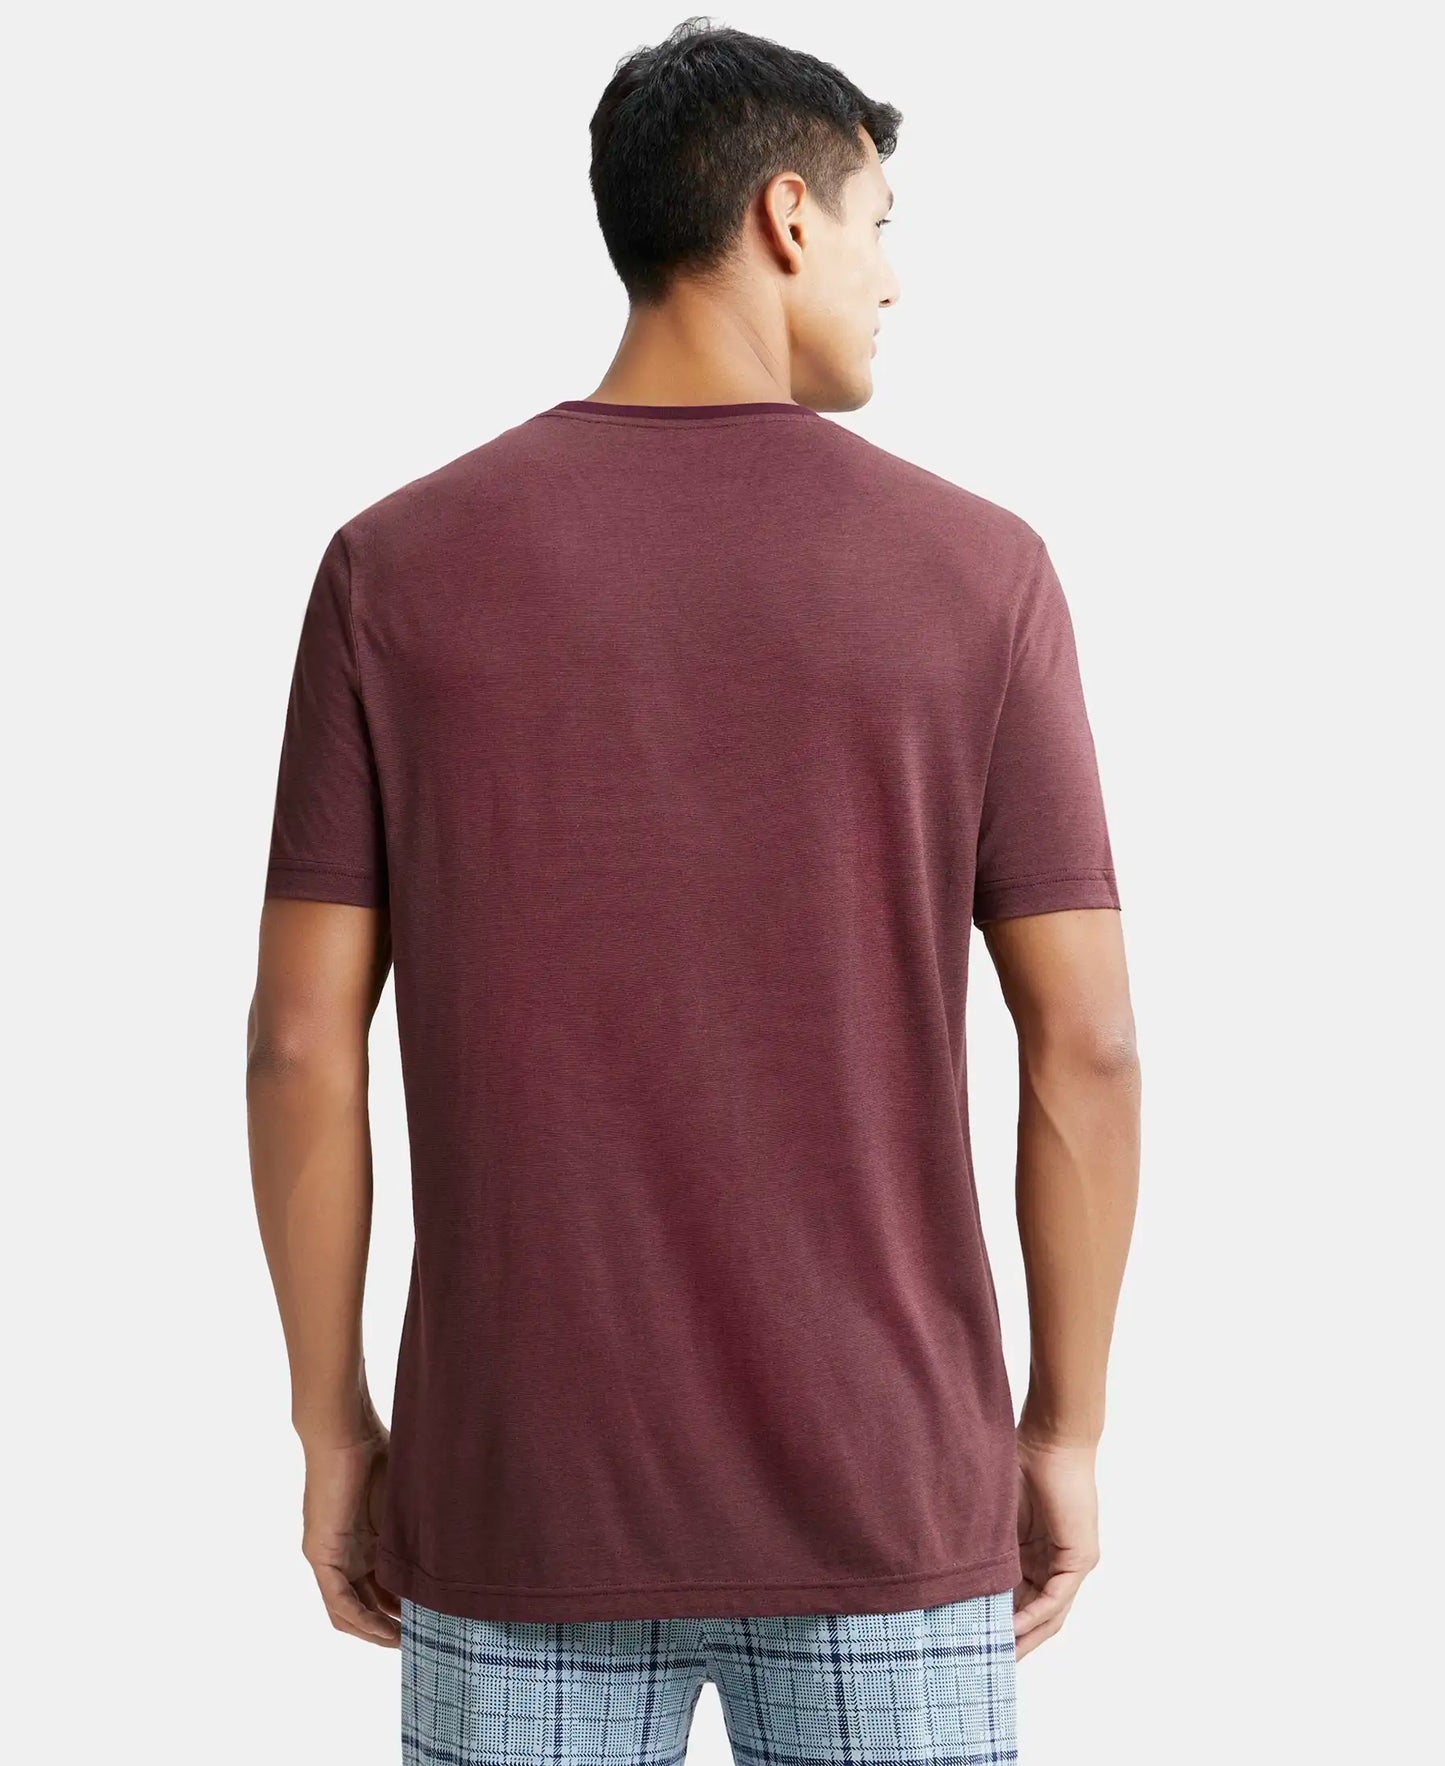 Tencel Micro Modal And Combed Cotton Blend Round Neck Half Sleeve T-Shirt - Wine tasting & Maroon-3